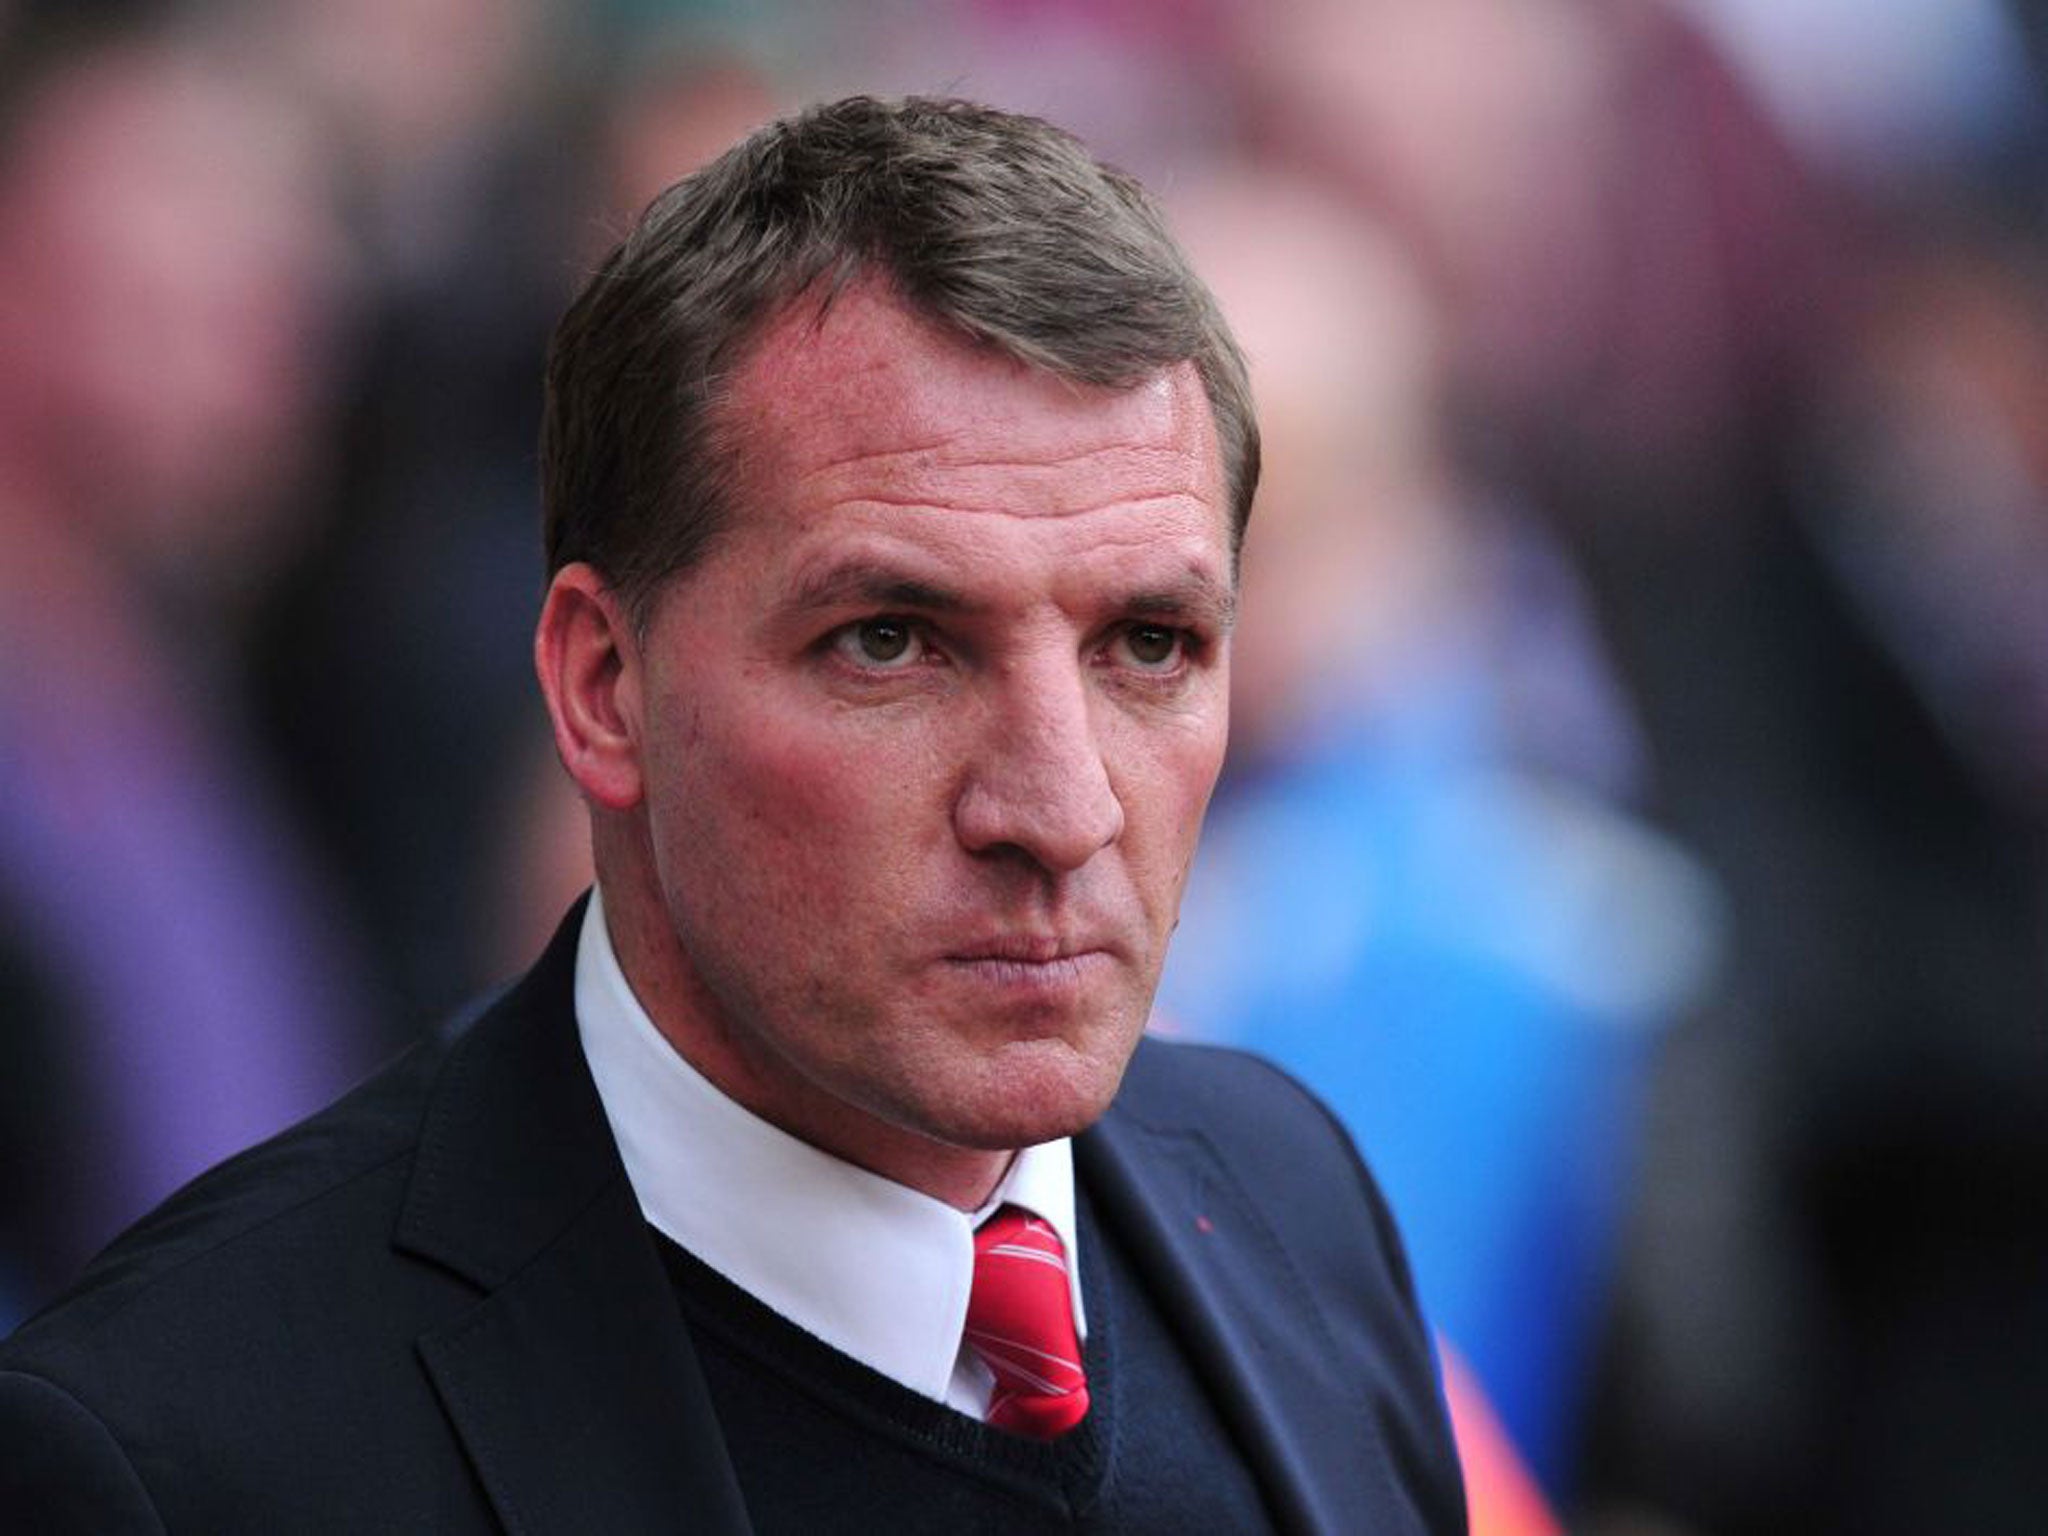 Brendan Rodgers, the Liverpool manager, will give a reading at today’s memorial service